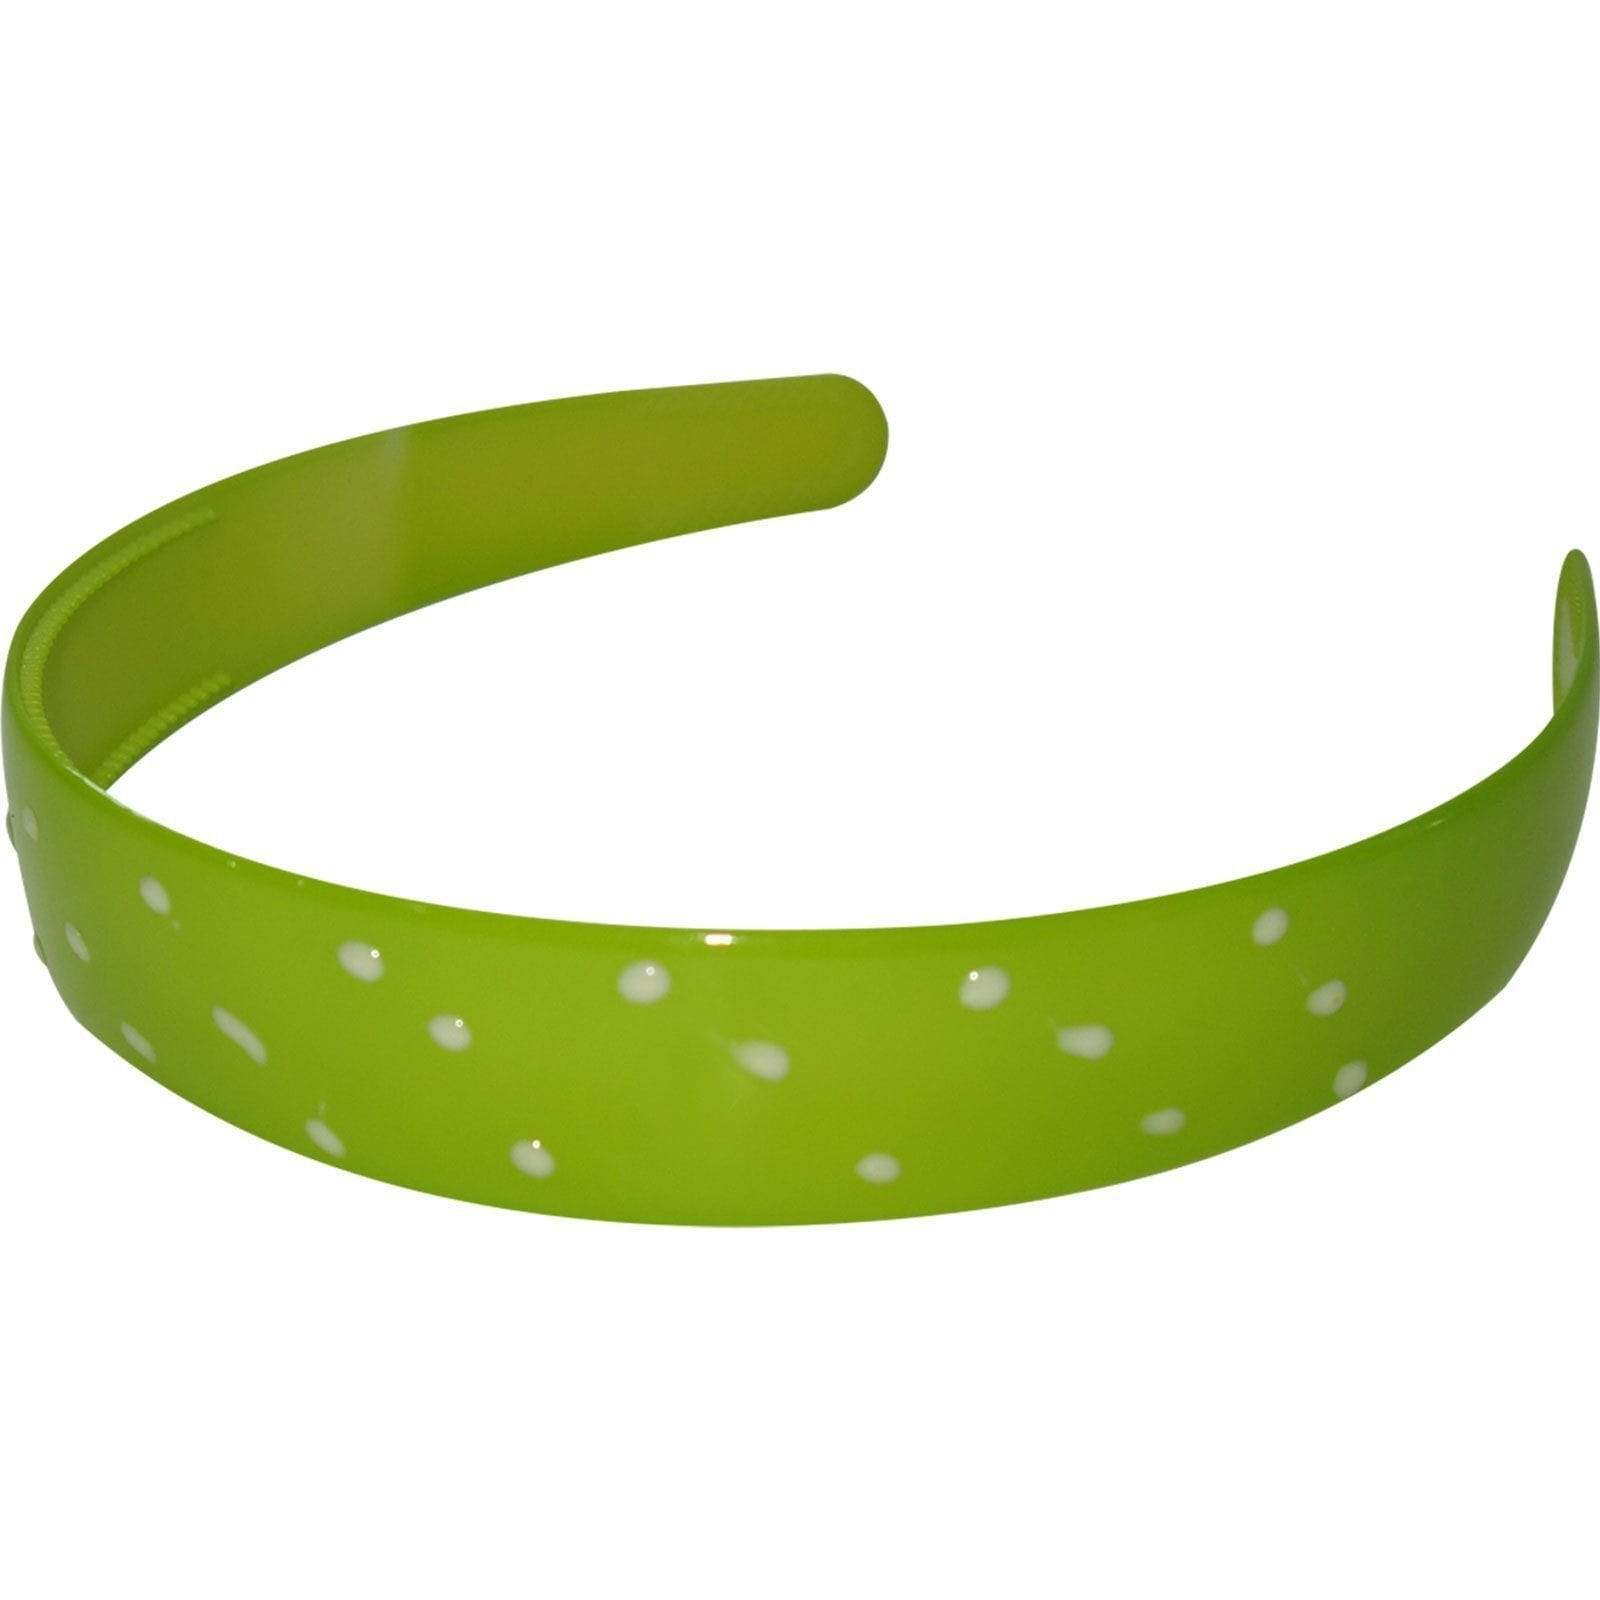 2 X Green White Dots Hairbands Headbands Alice Hair Bands Girls Kids Accessories